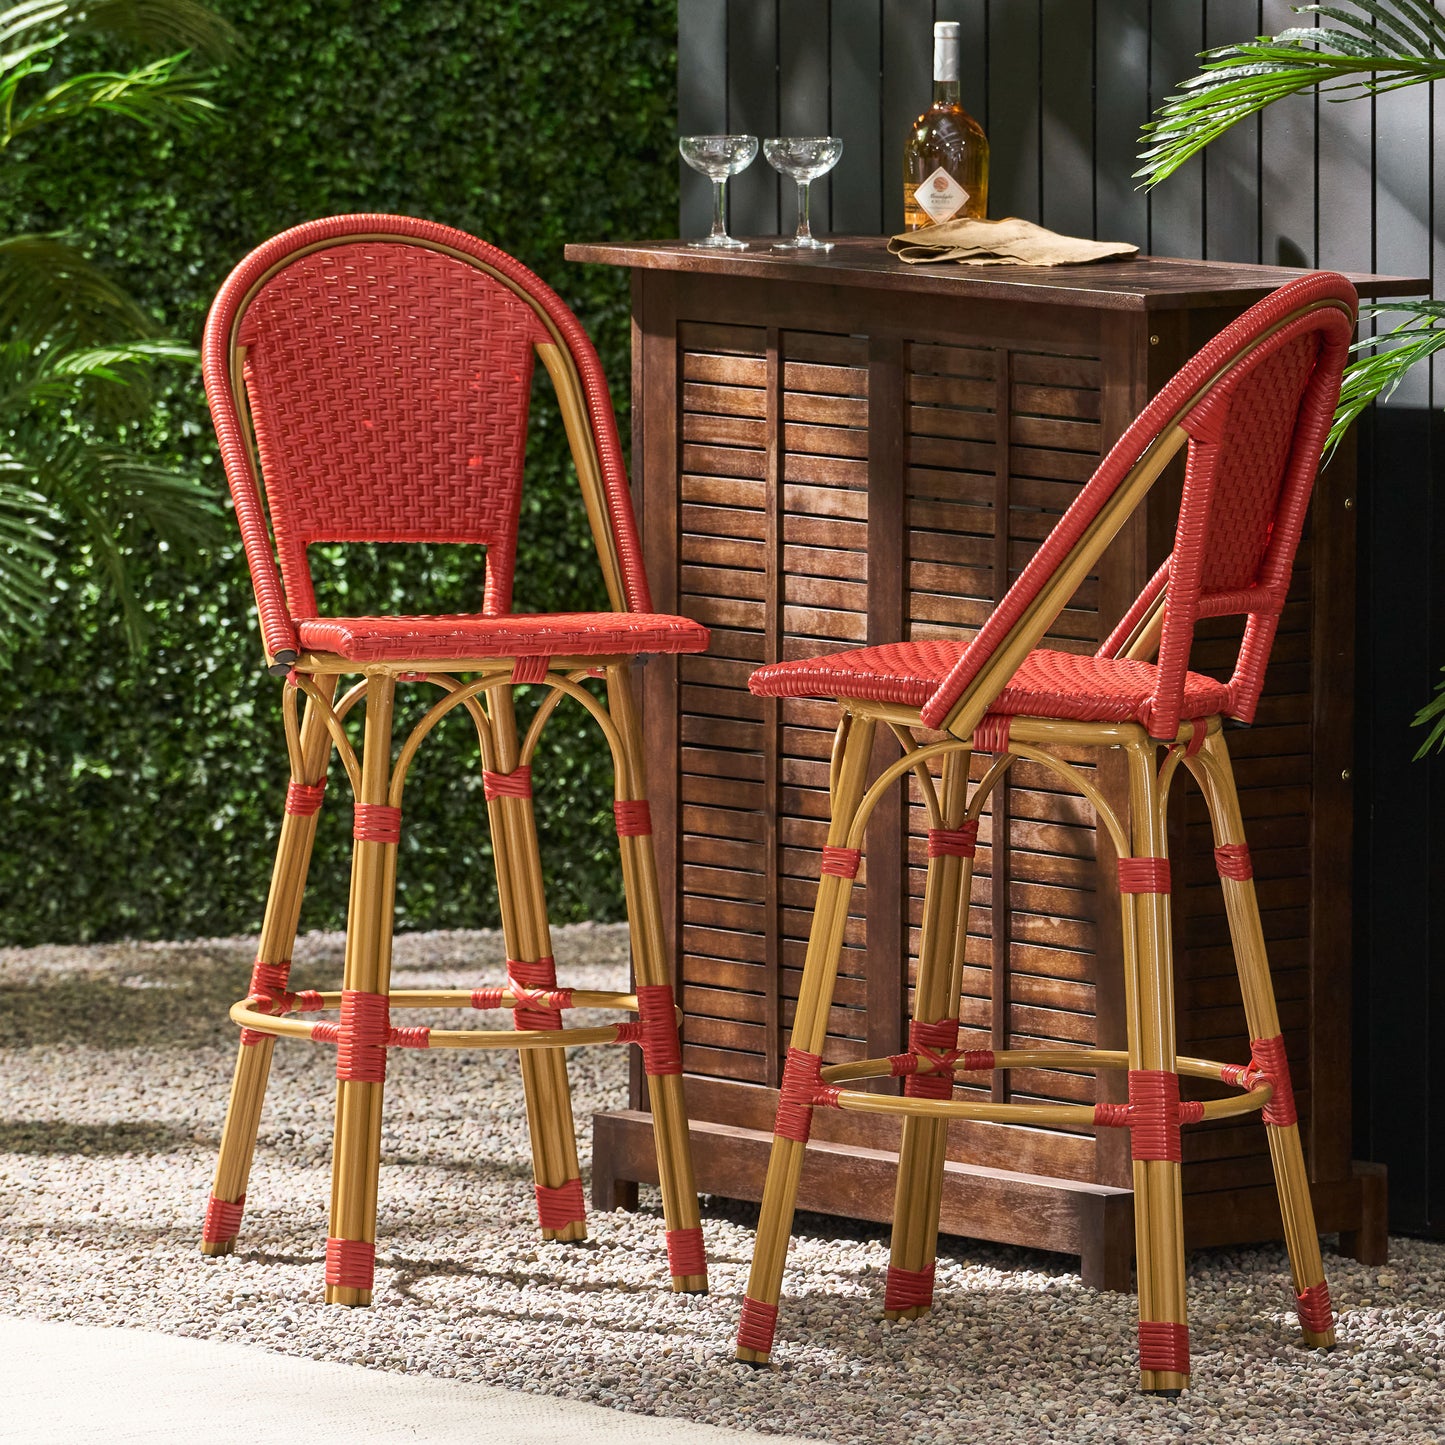 Cotterell Outdoor French Wicker and Aluminum 29.5 Inch Barstools, Set of 2